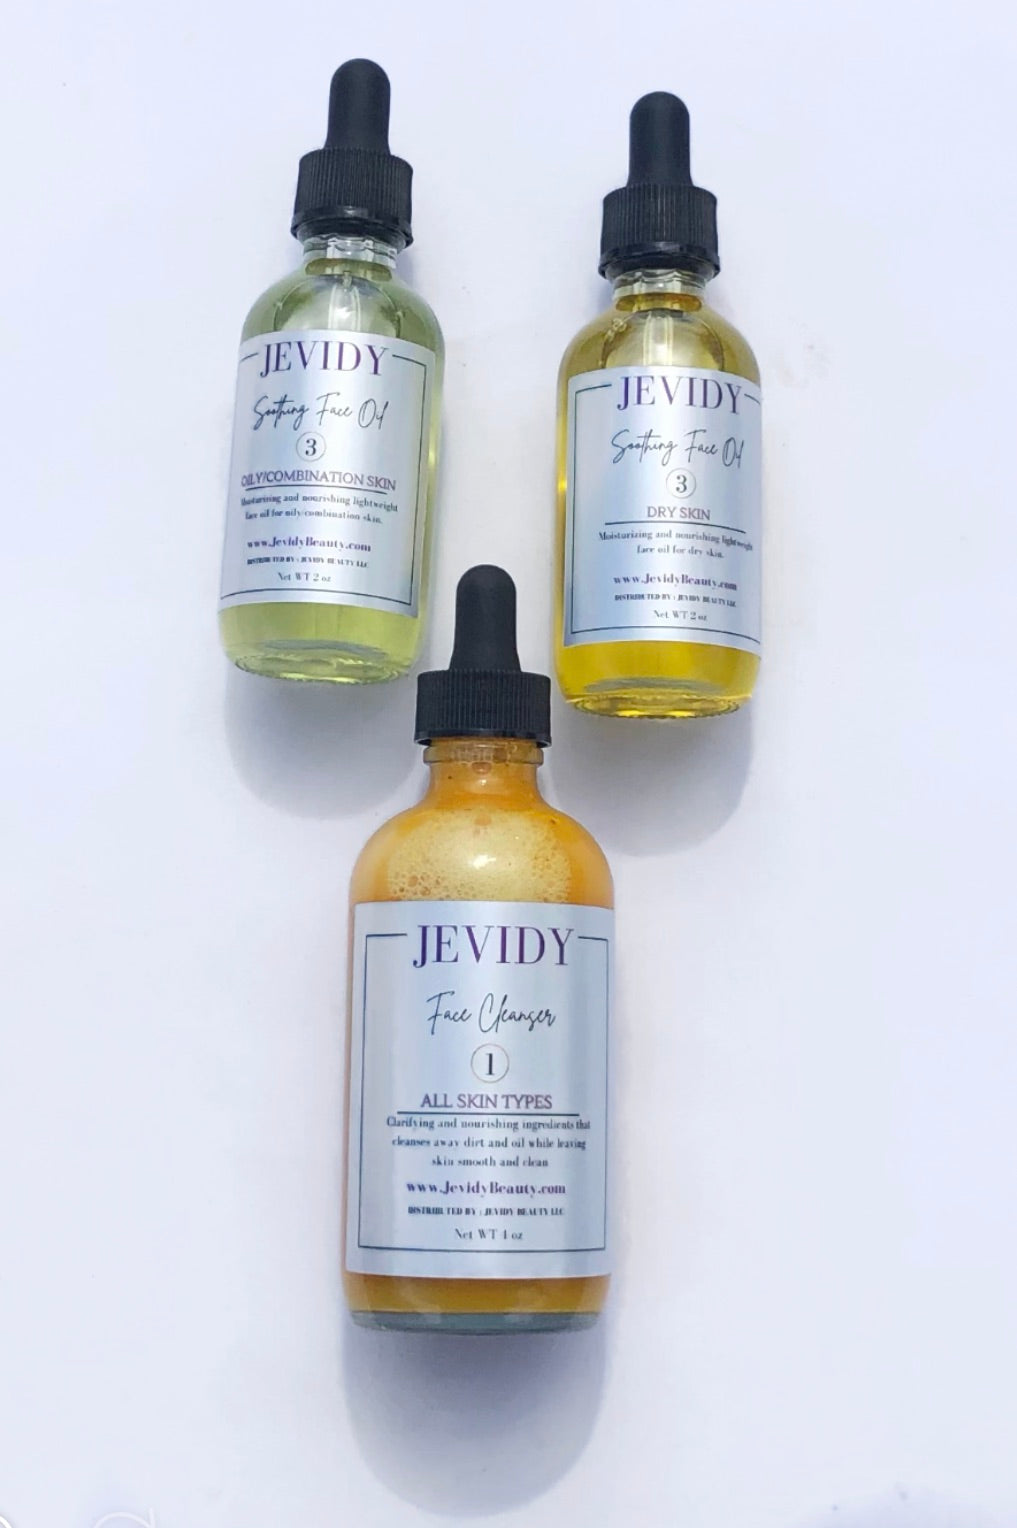 Jevidy Turmeric Face Cleanser 4 oz Face Wash and Jevidy Soothing Face Oil for dry and Oily skin